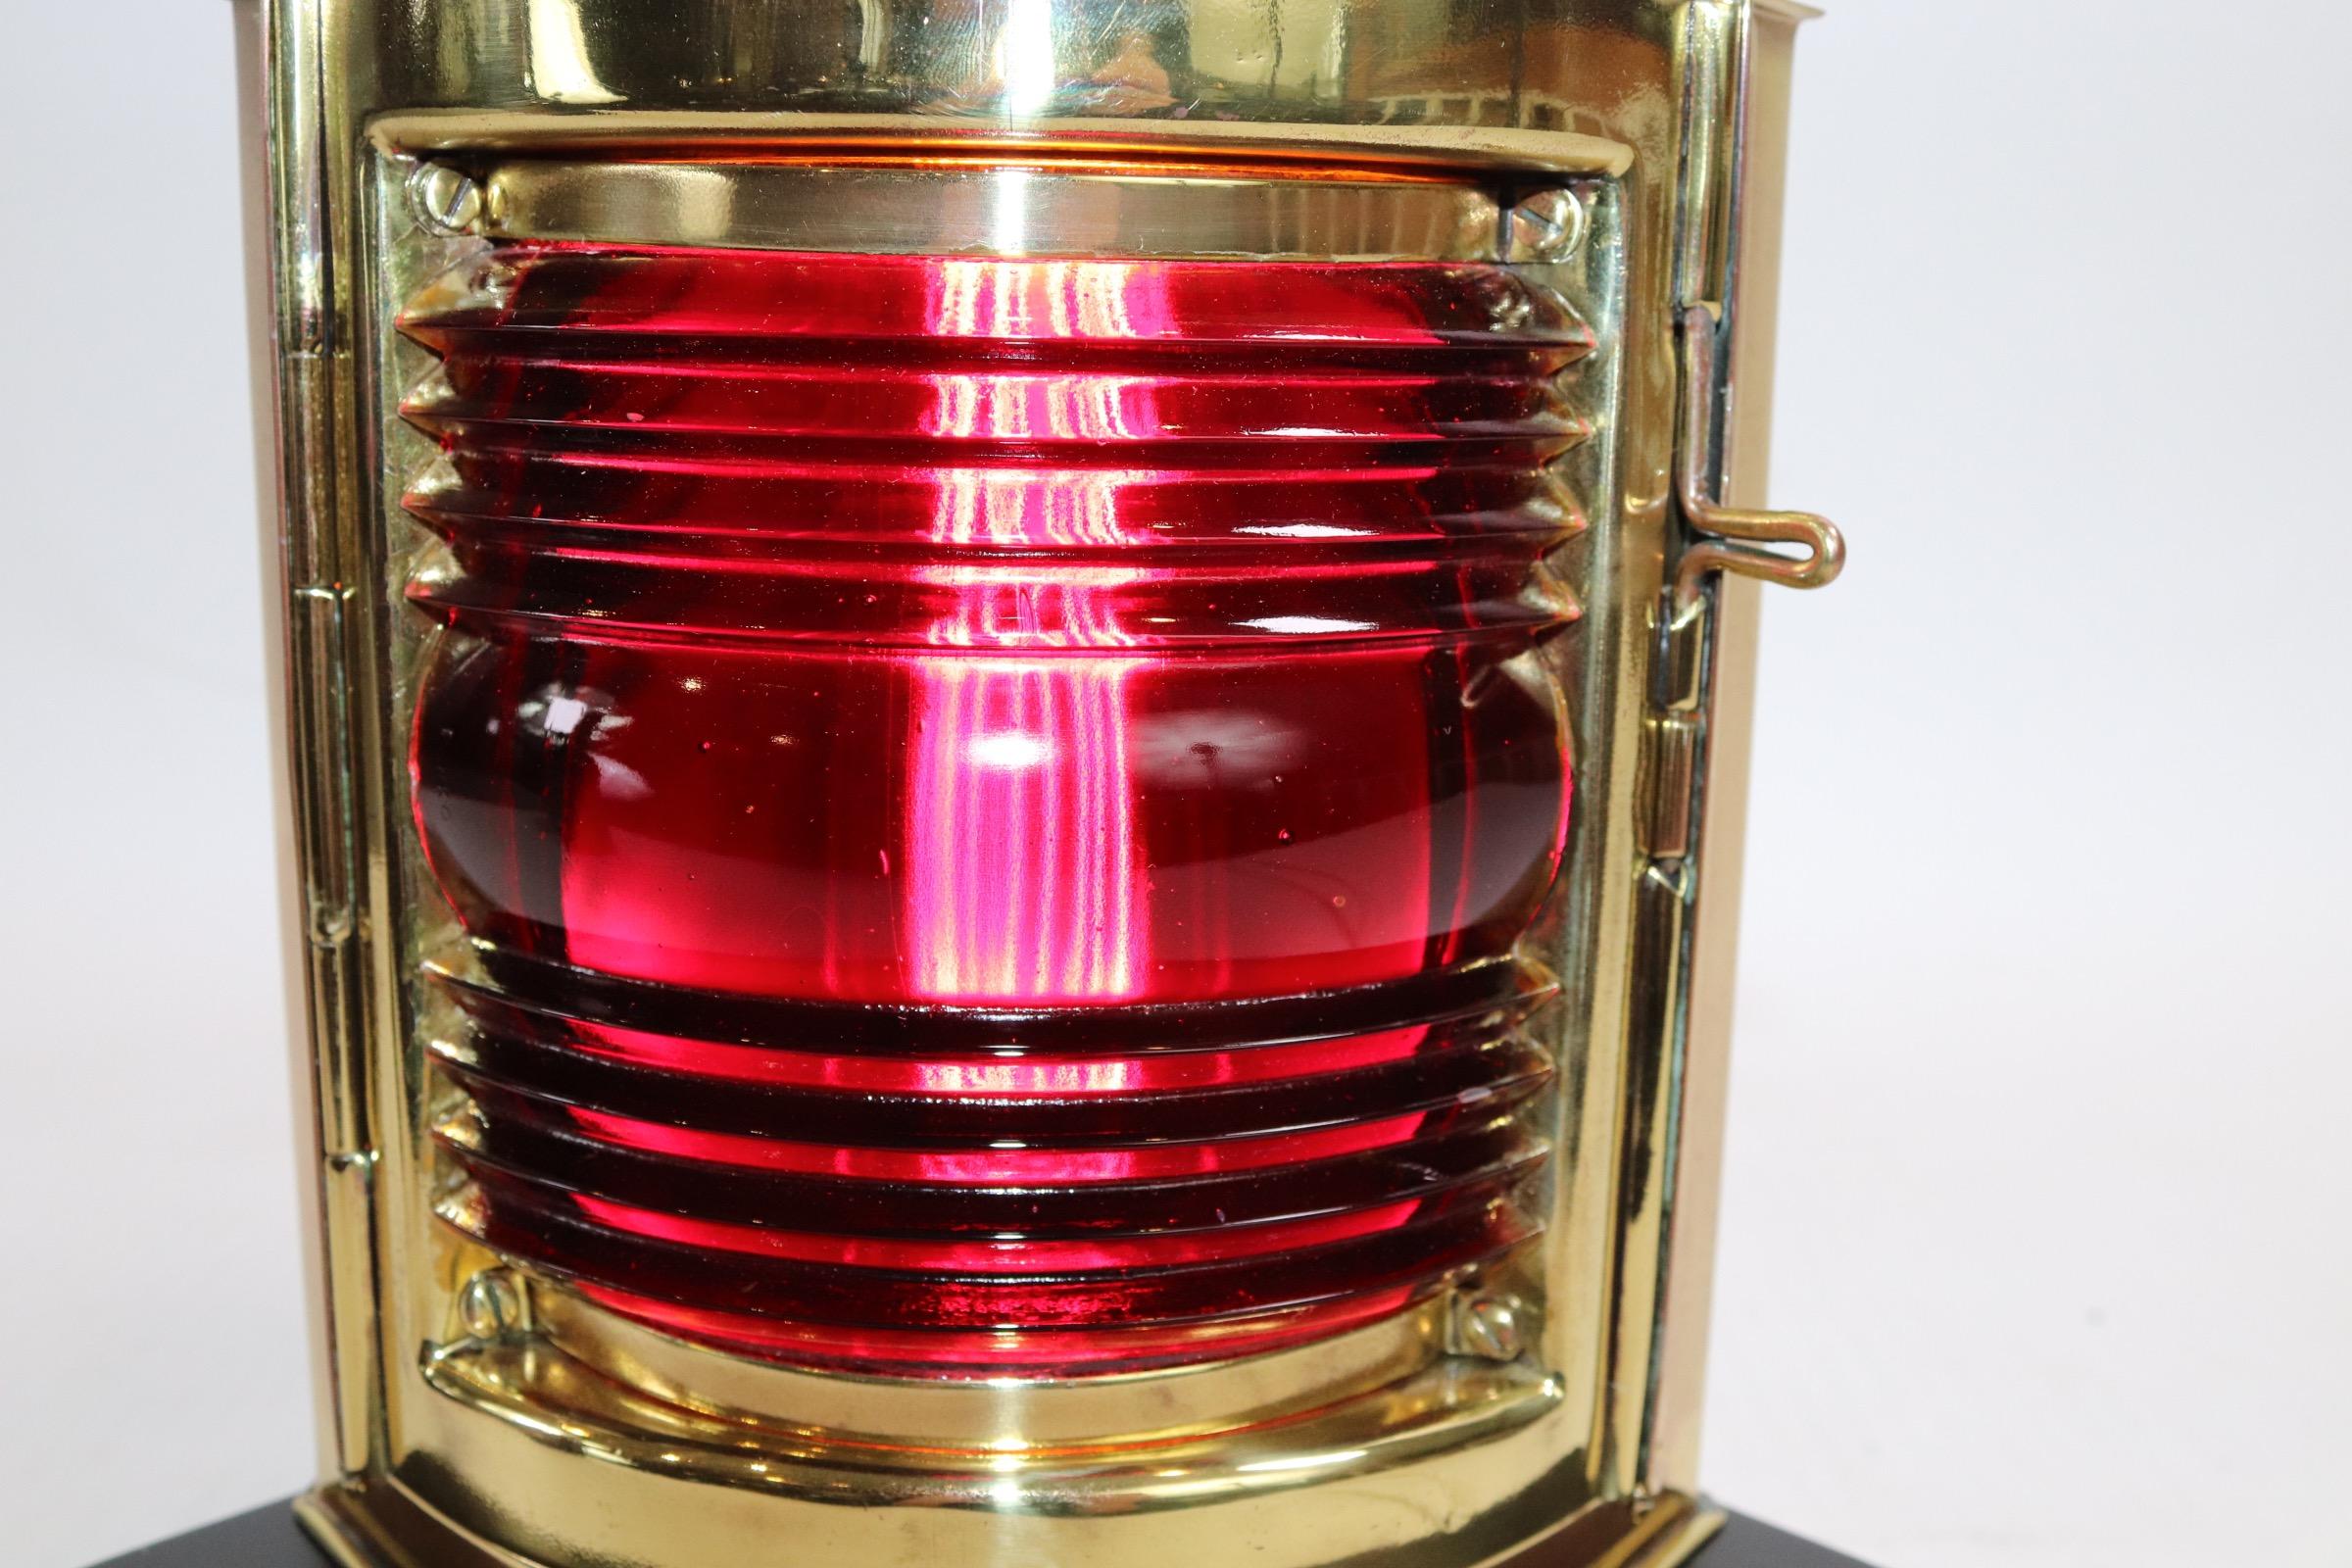 Solid brass highly polished and lacquered boat lantern by the famous Perkins Marine or Perko. With a rich red port lense, mounted to a thick wood display base with dark finish. The lantern has been wired for home use. Hinged door to front. Weight is